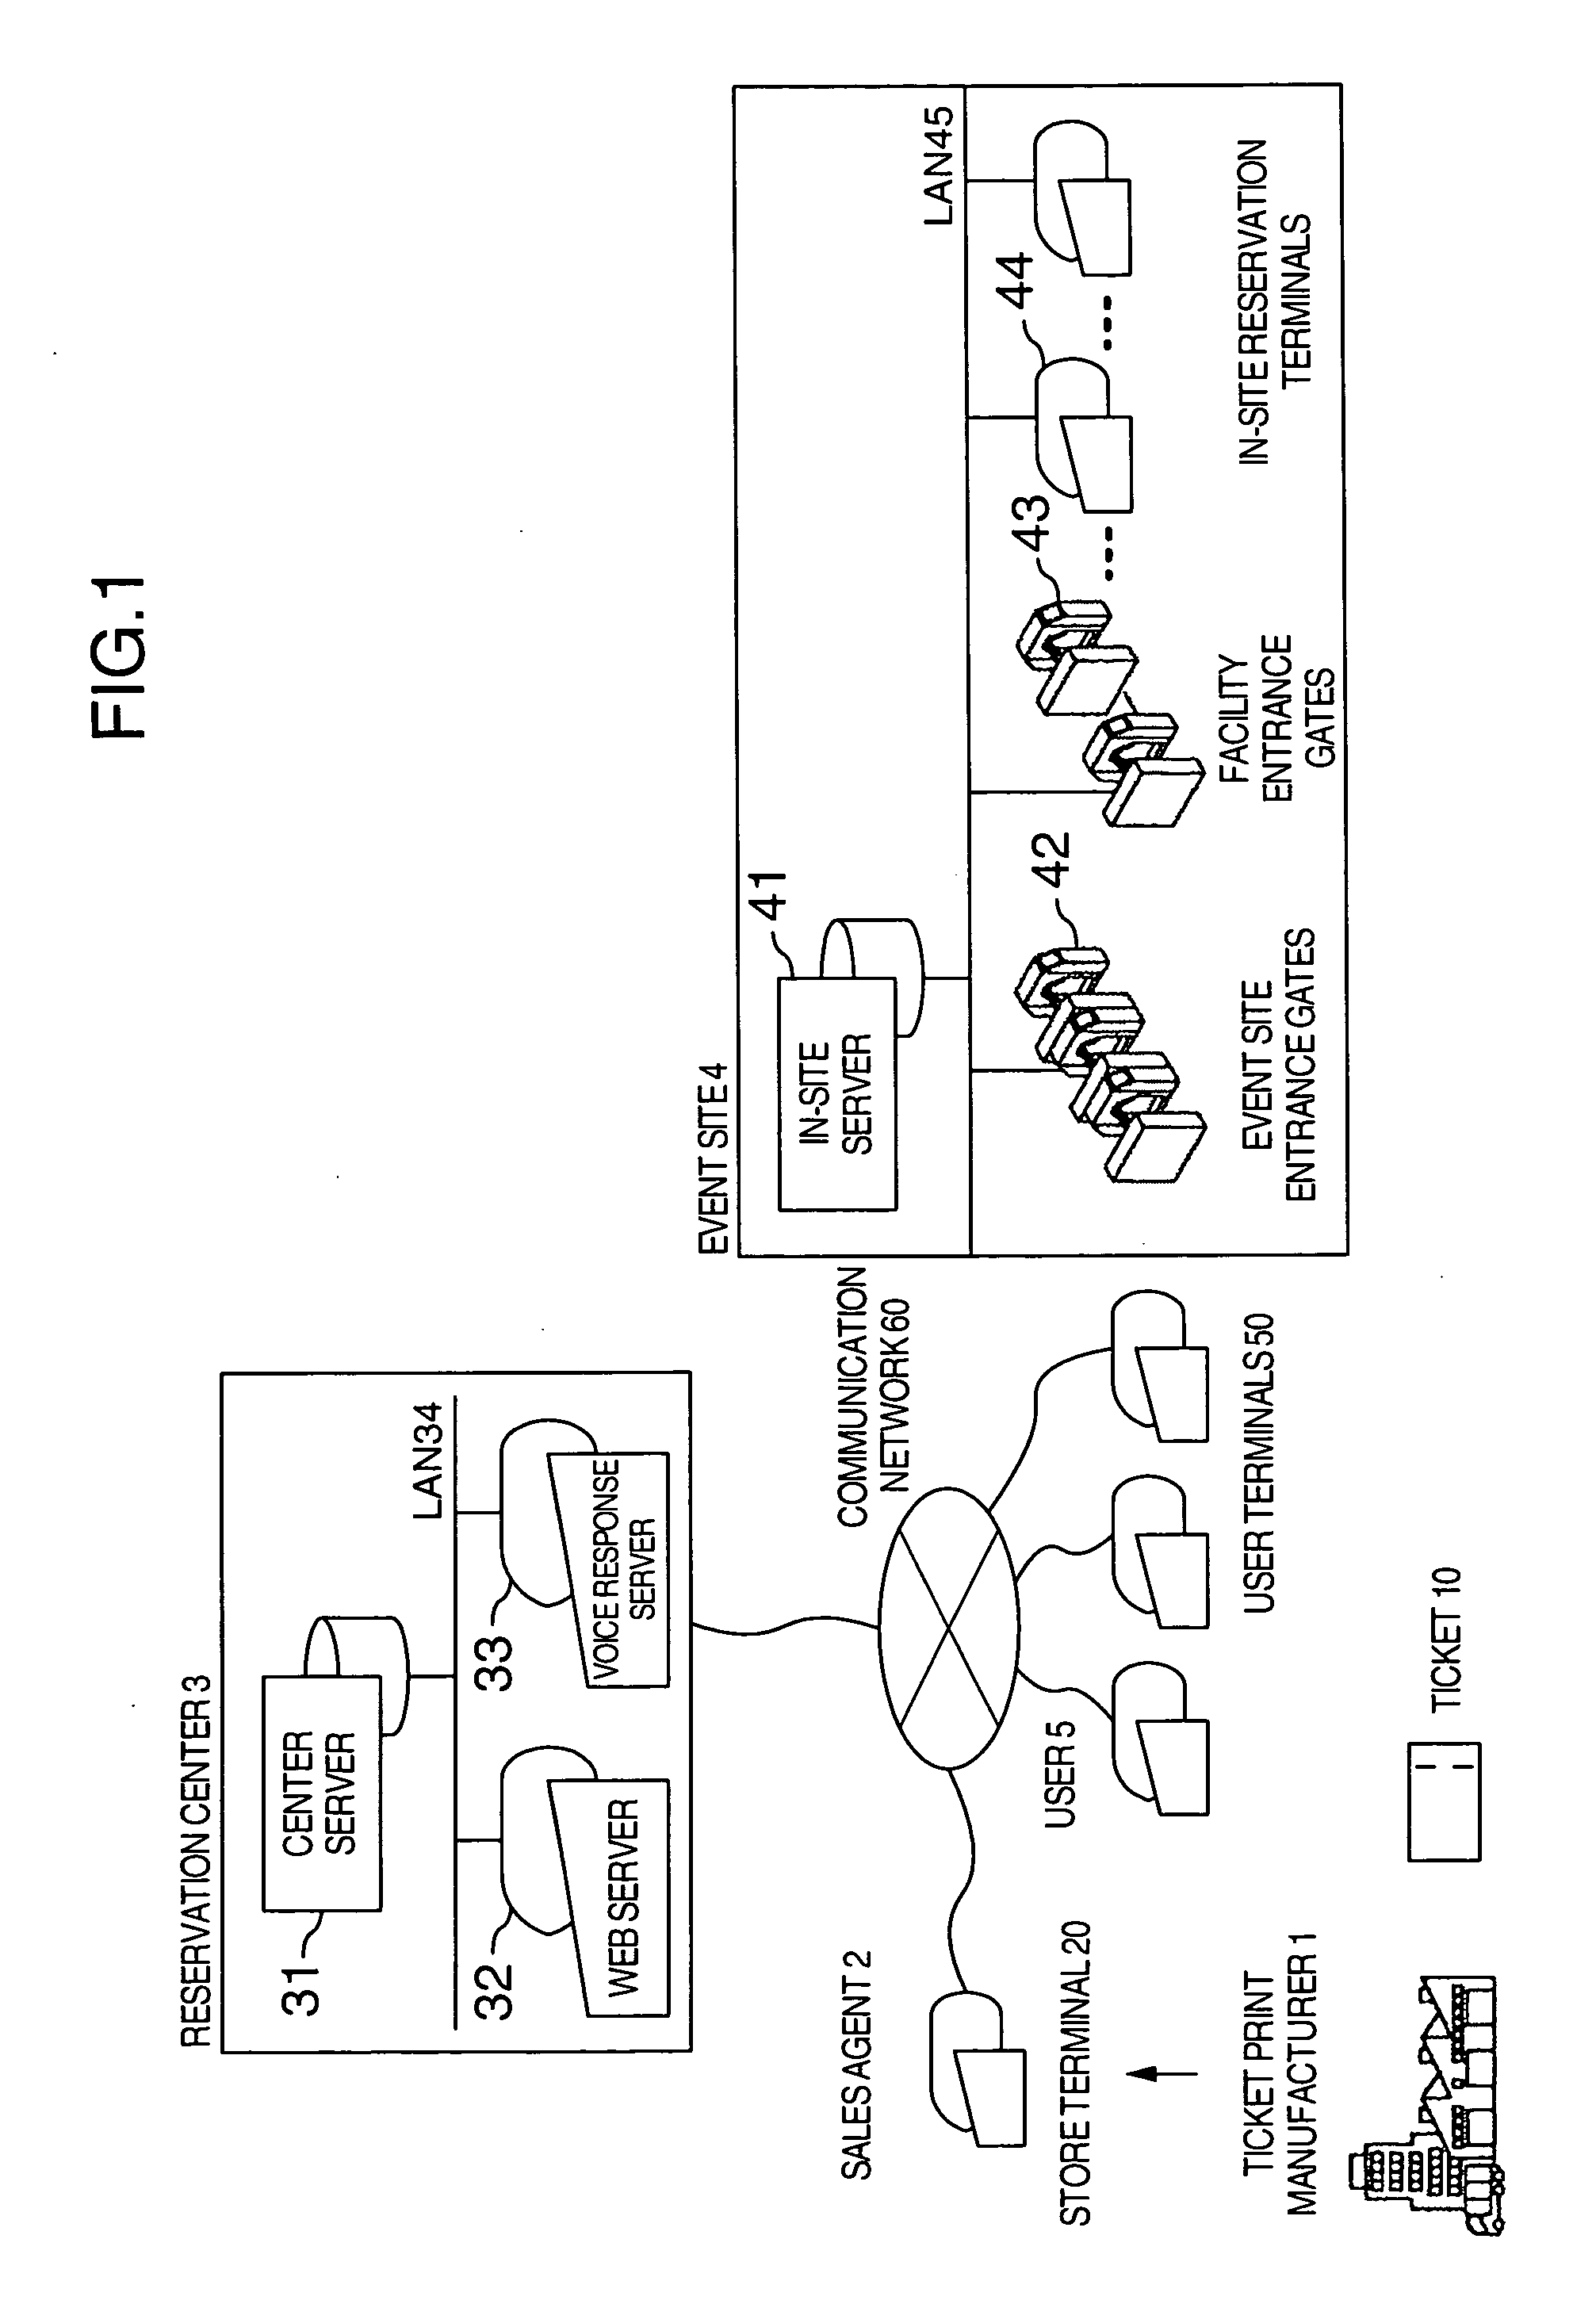 Admission control method and system thereof, and facility reservation confirmation method and system thereof